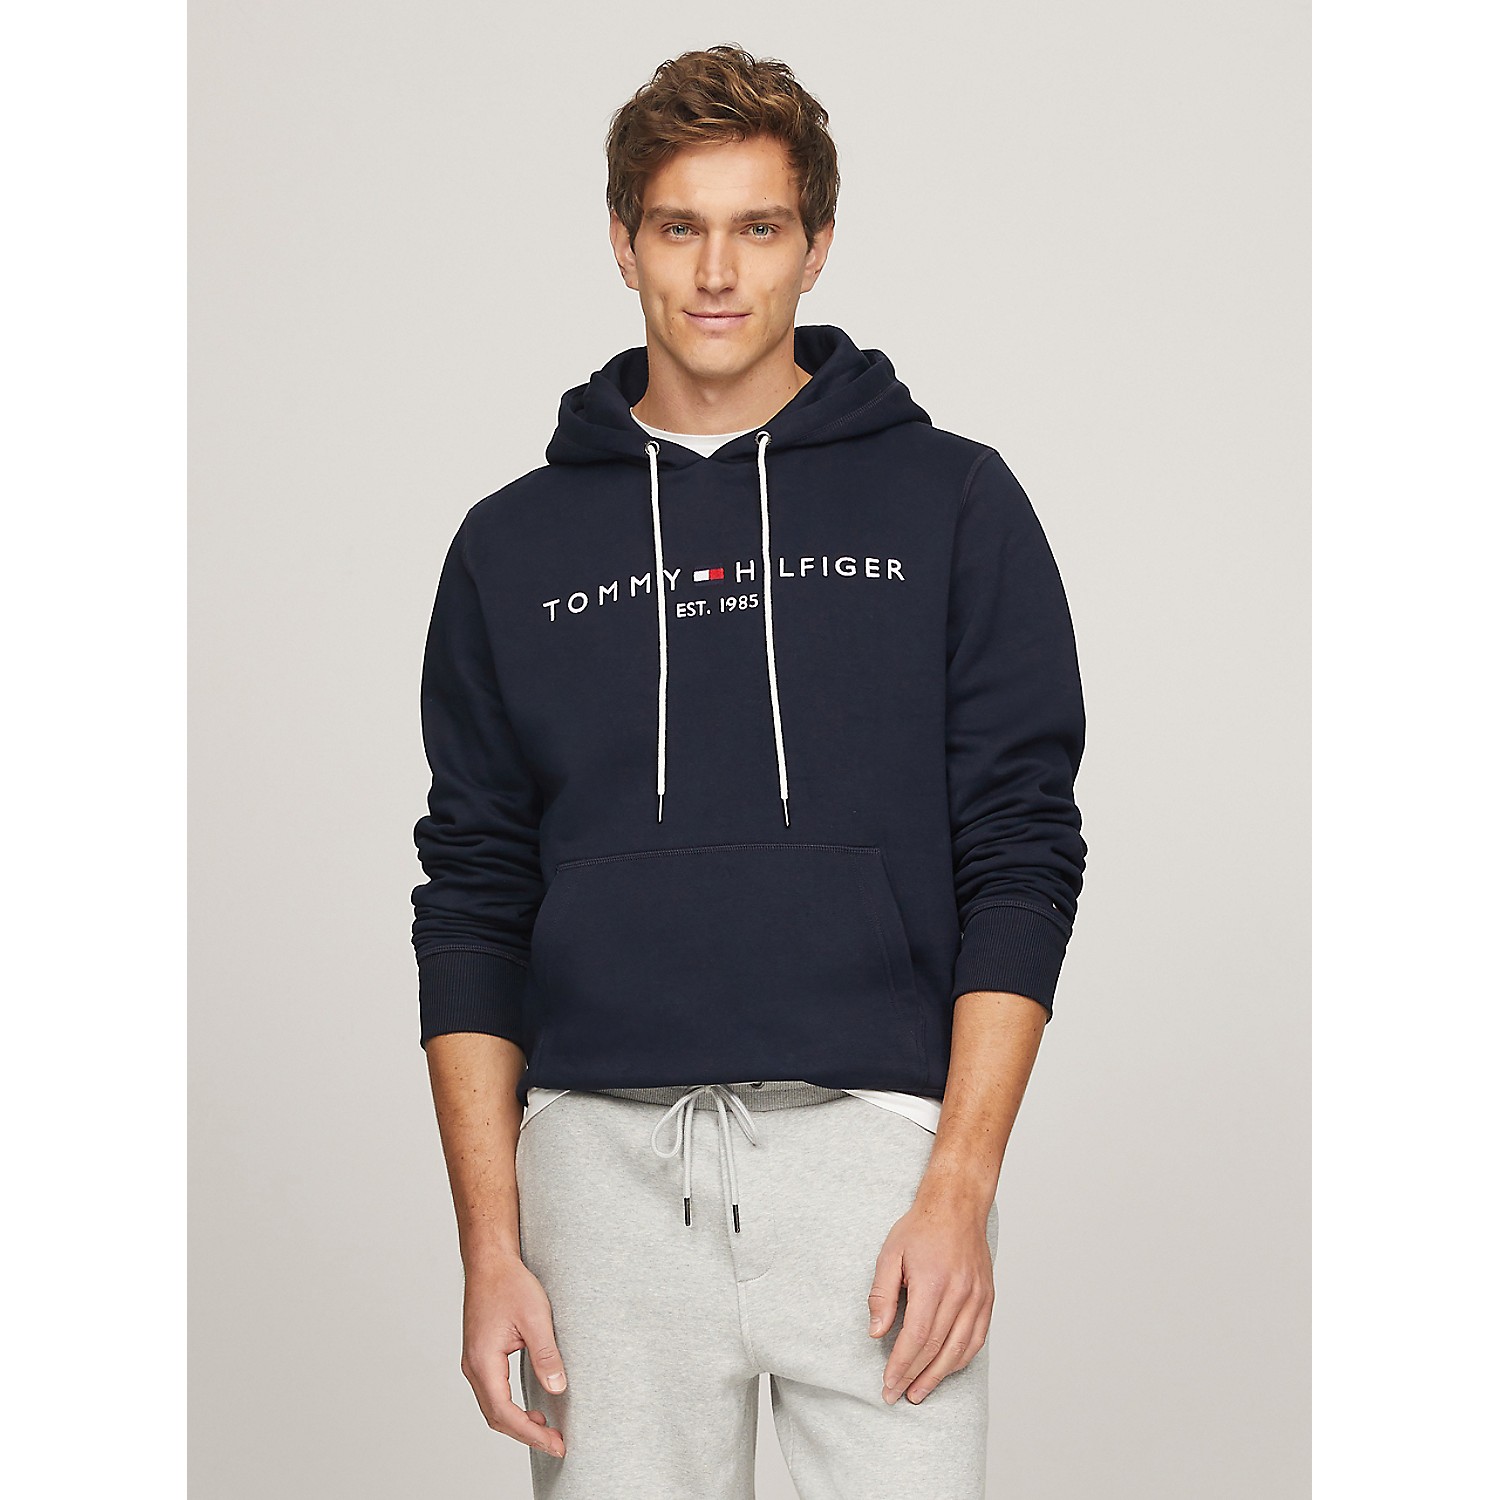 TOMMY HILFIGER Embroidered Tommy Logo Hoodie